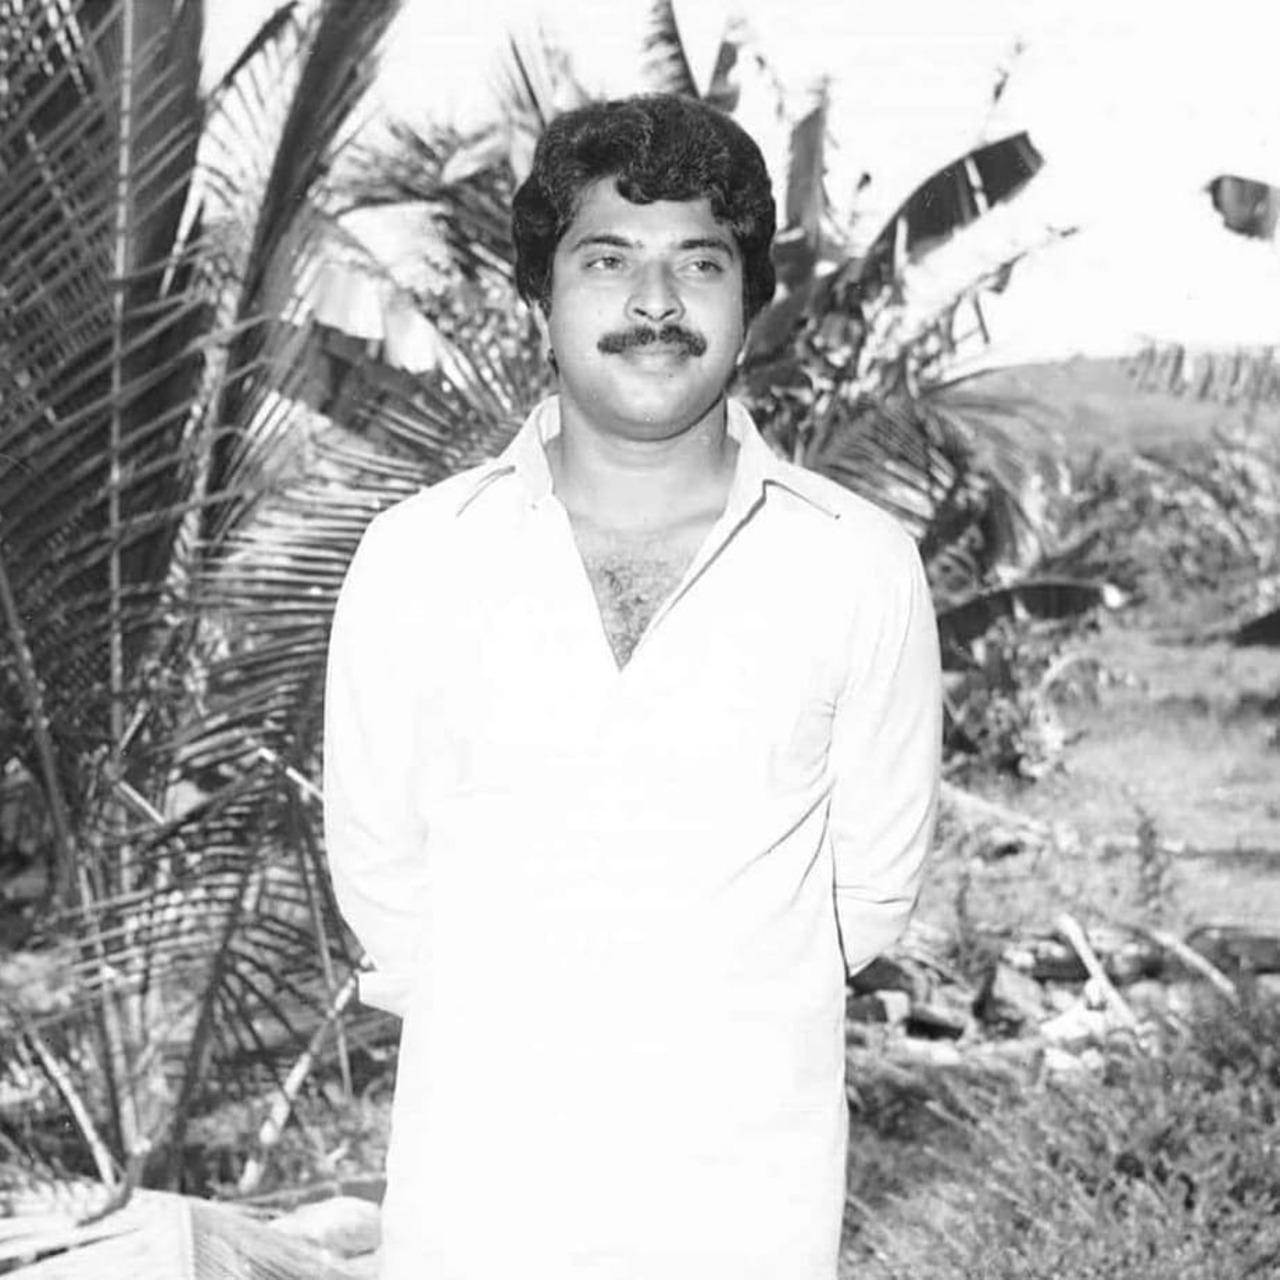 Mammootty's first leading role was in I. V. Sasi's unreleased film Devalokam (1979). Mammootty's breakthrough came in 1981 when he received the Kerala State Film Award for Second Best Actor for his performance in Ahimsa. Major commercial successes during this time included the 1983 films Sandhyakku Virinja Poovu and Aa Raathri